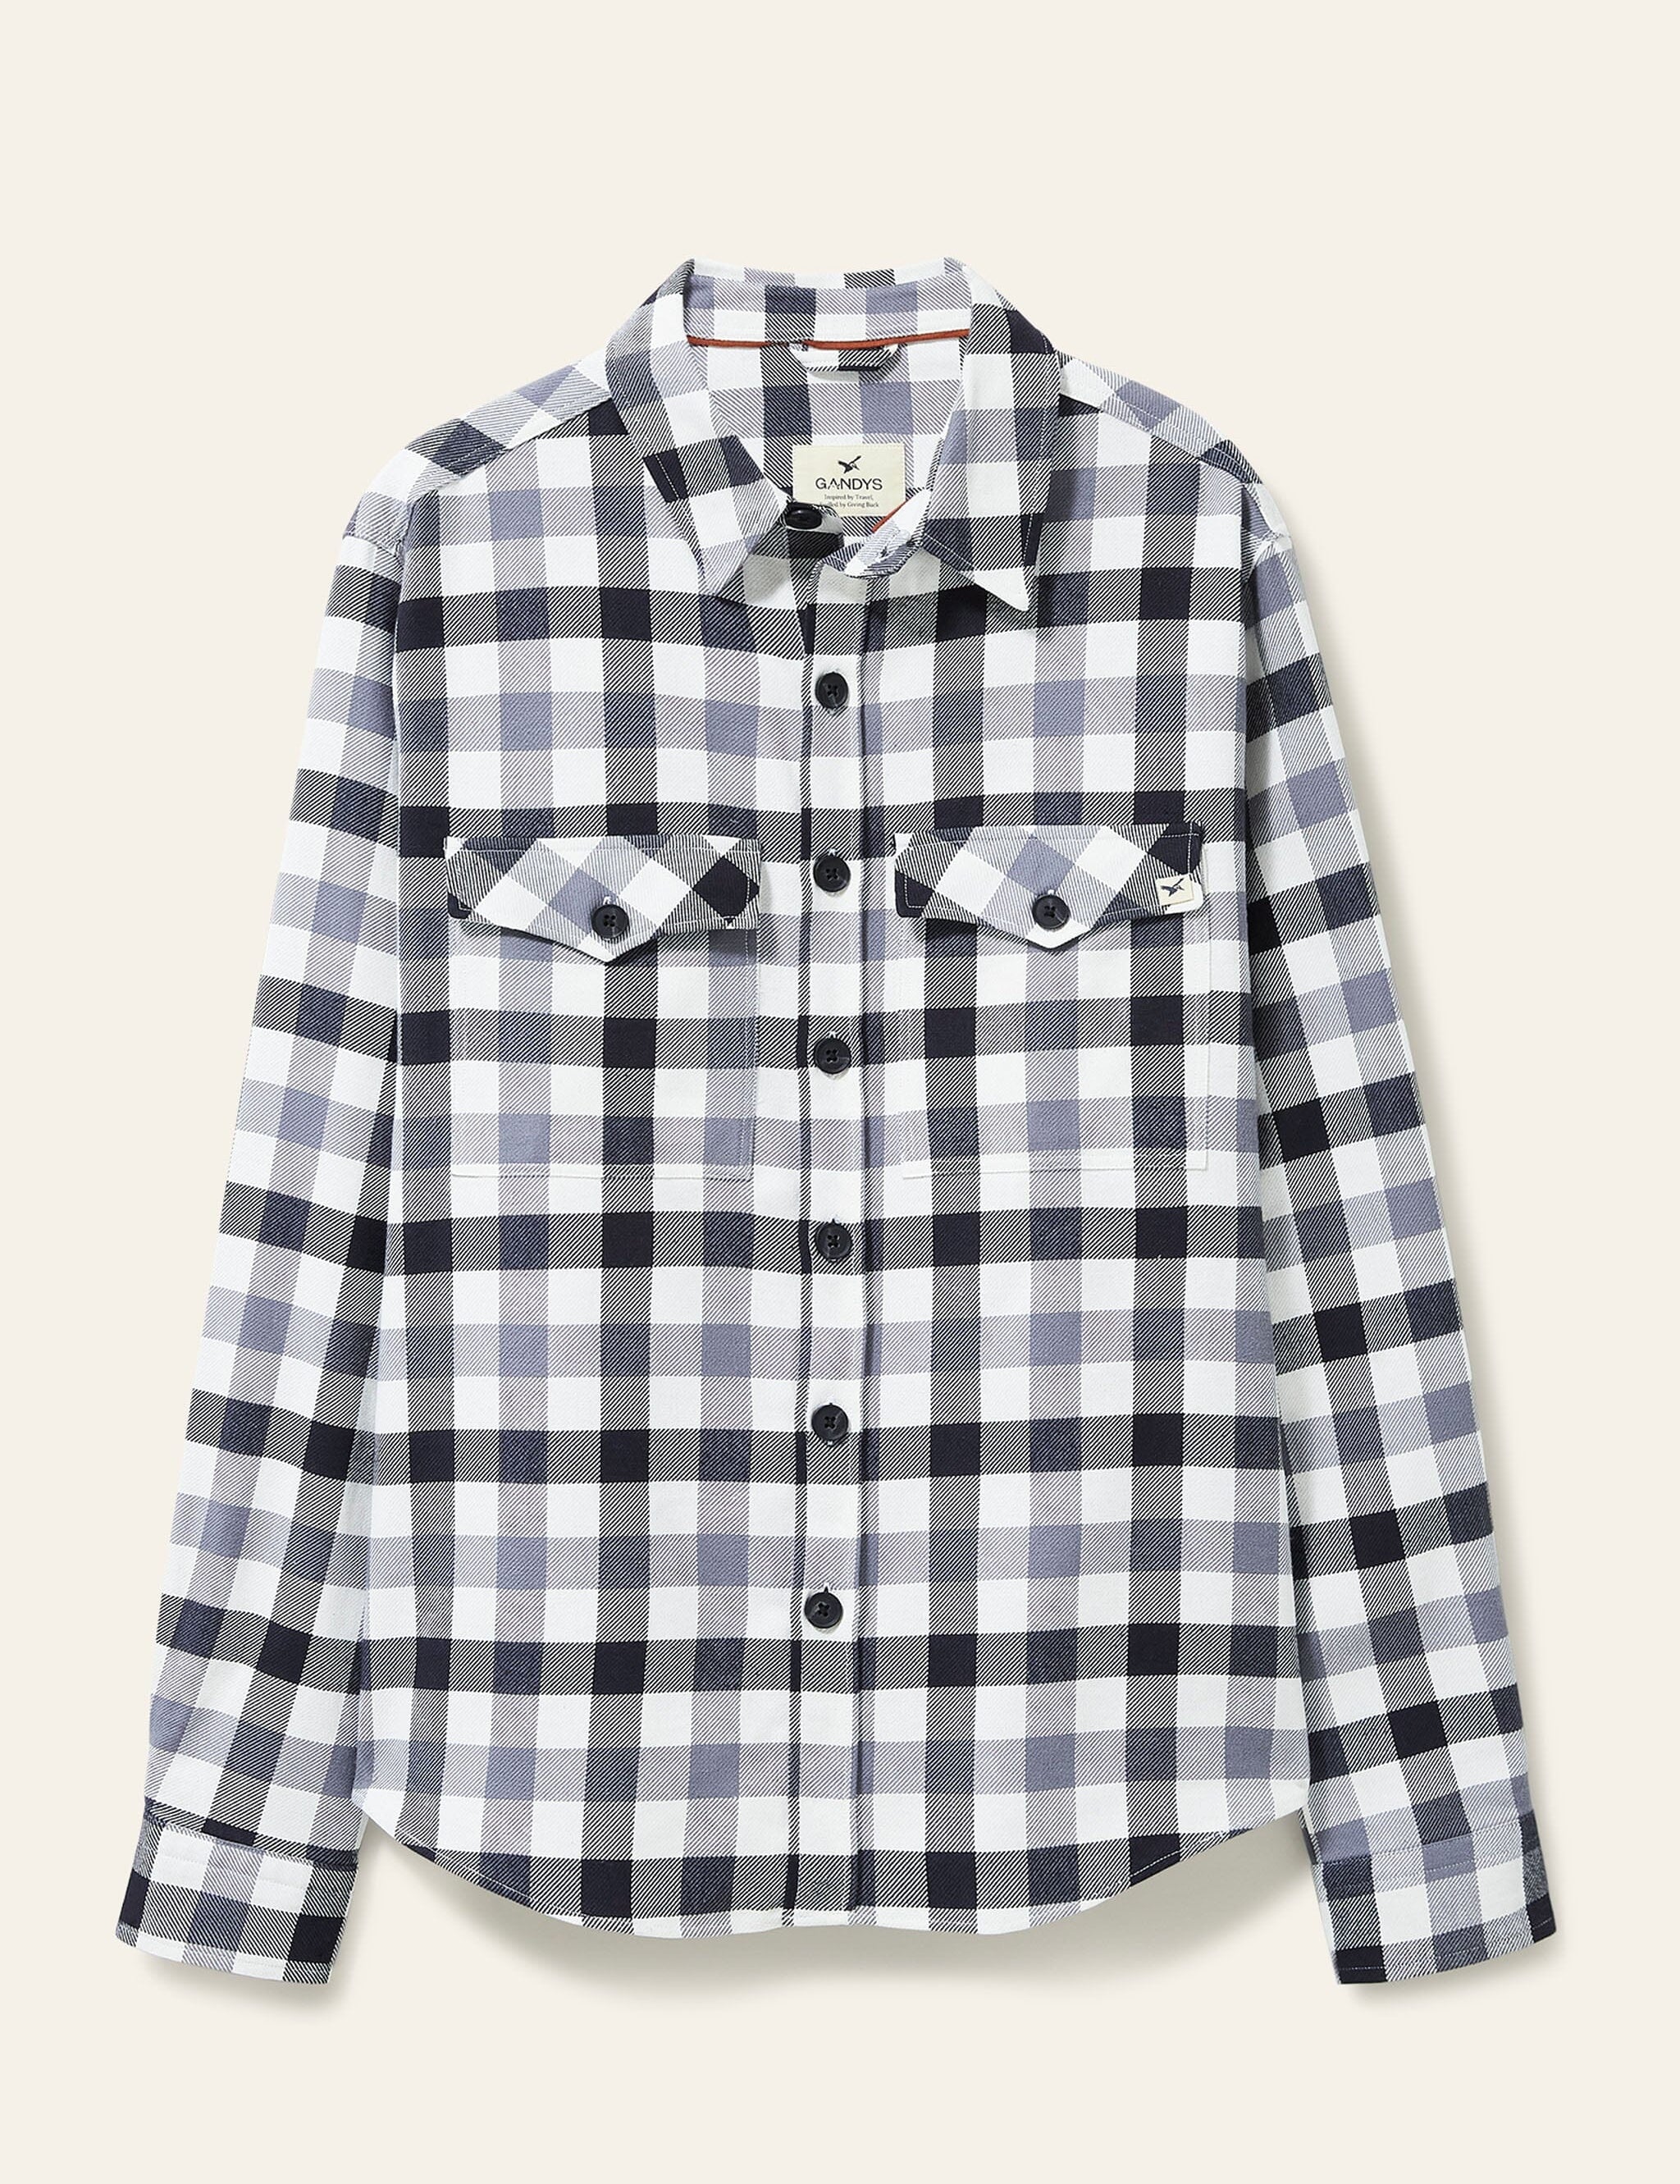 charcoal-ontario-relaxed-fit-shirt-812492.jpg